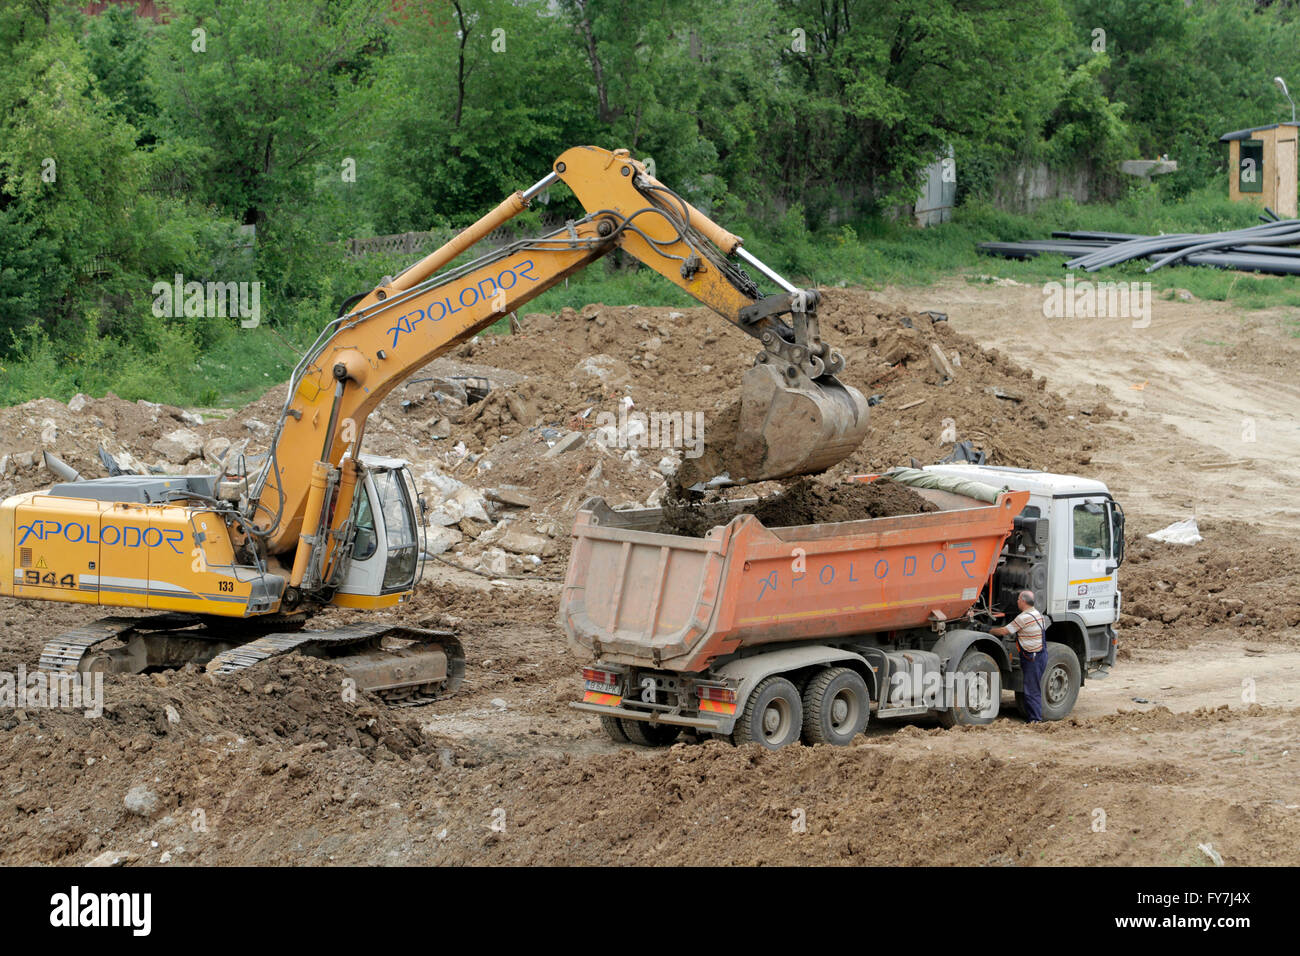 Bucharest, Romania, April 19, 2016: An excavator working removing earth and loading it into a truck dumper  on a construction si Stock Photo